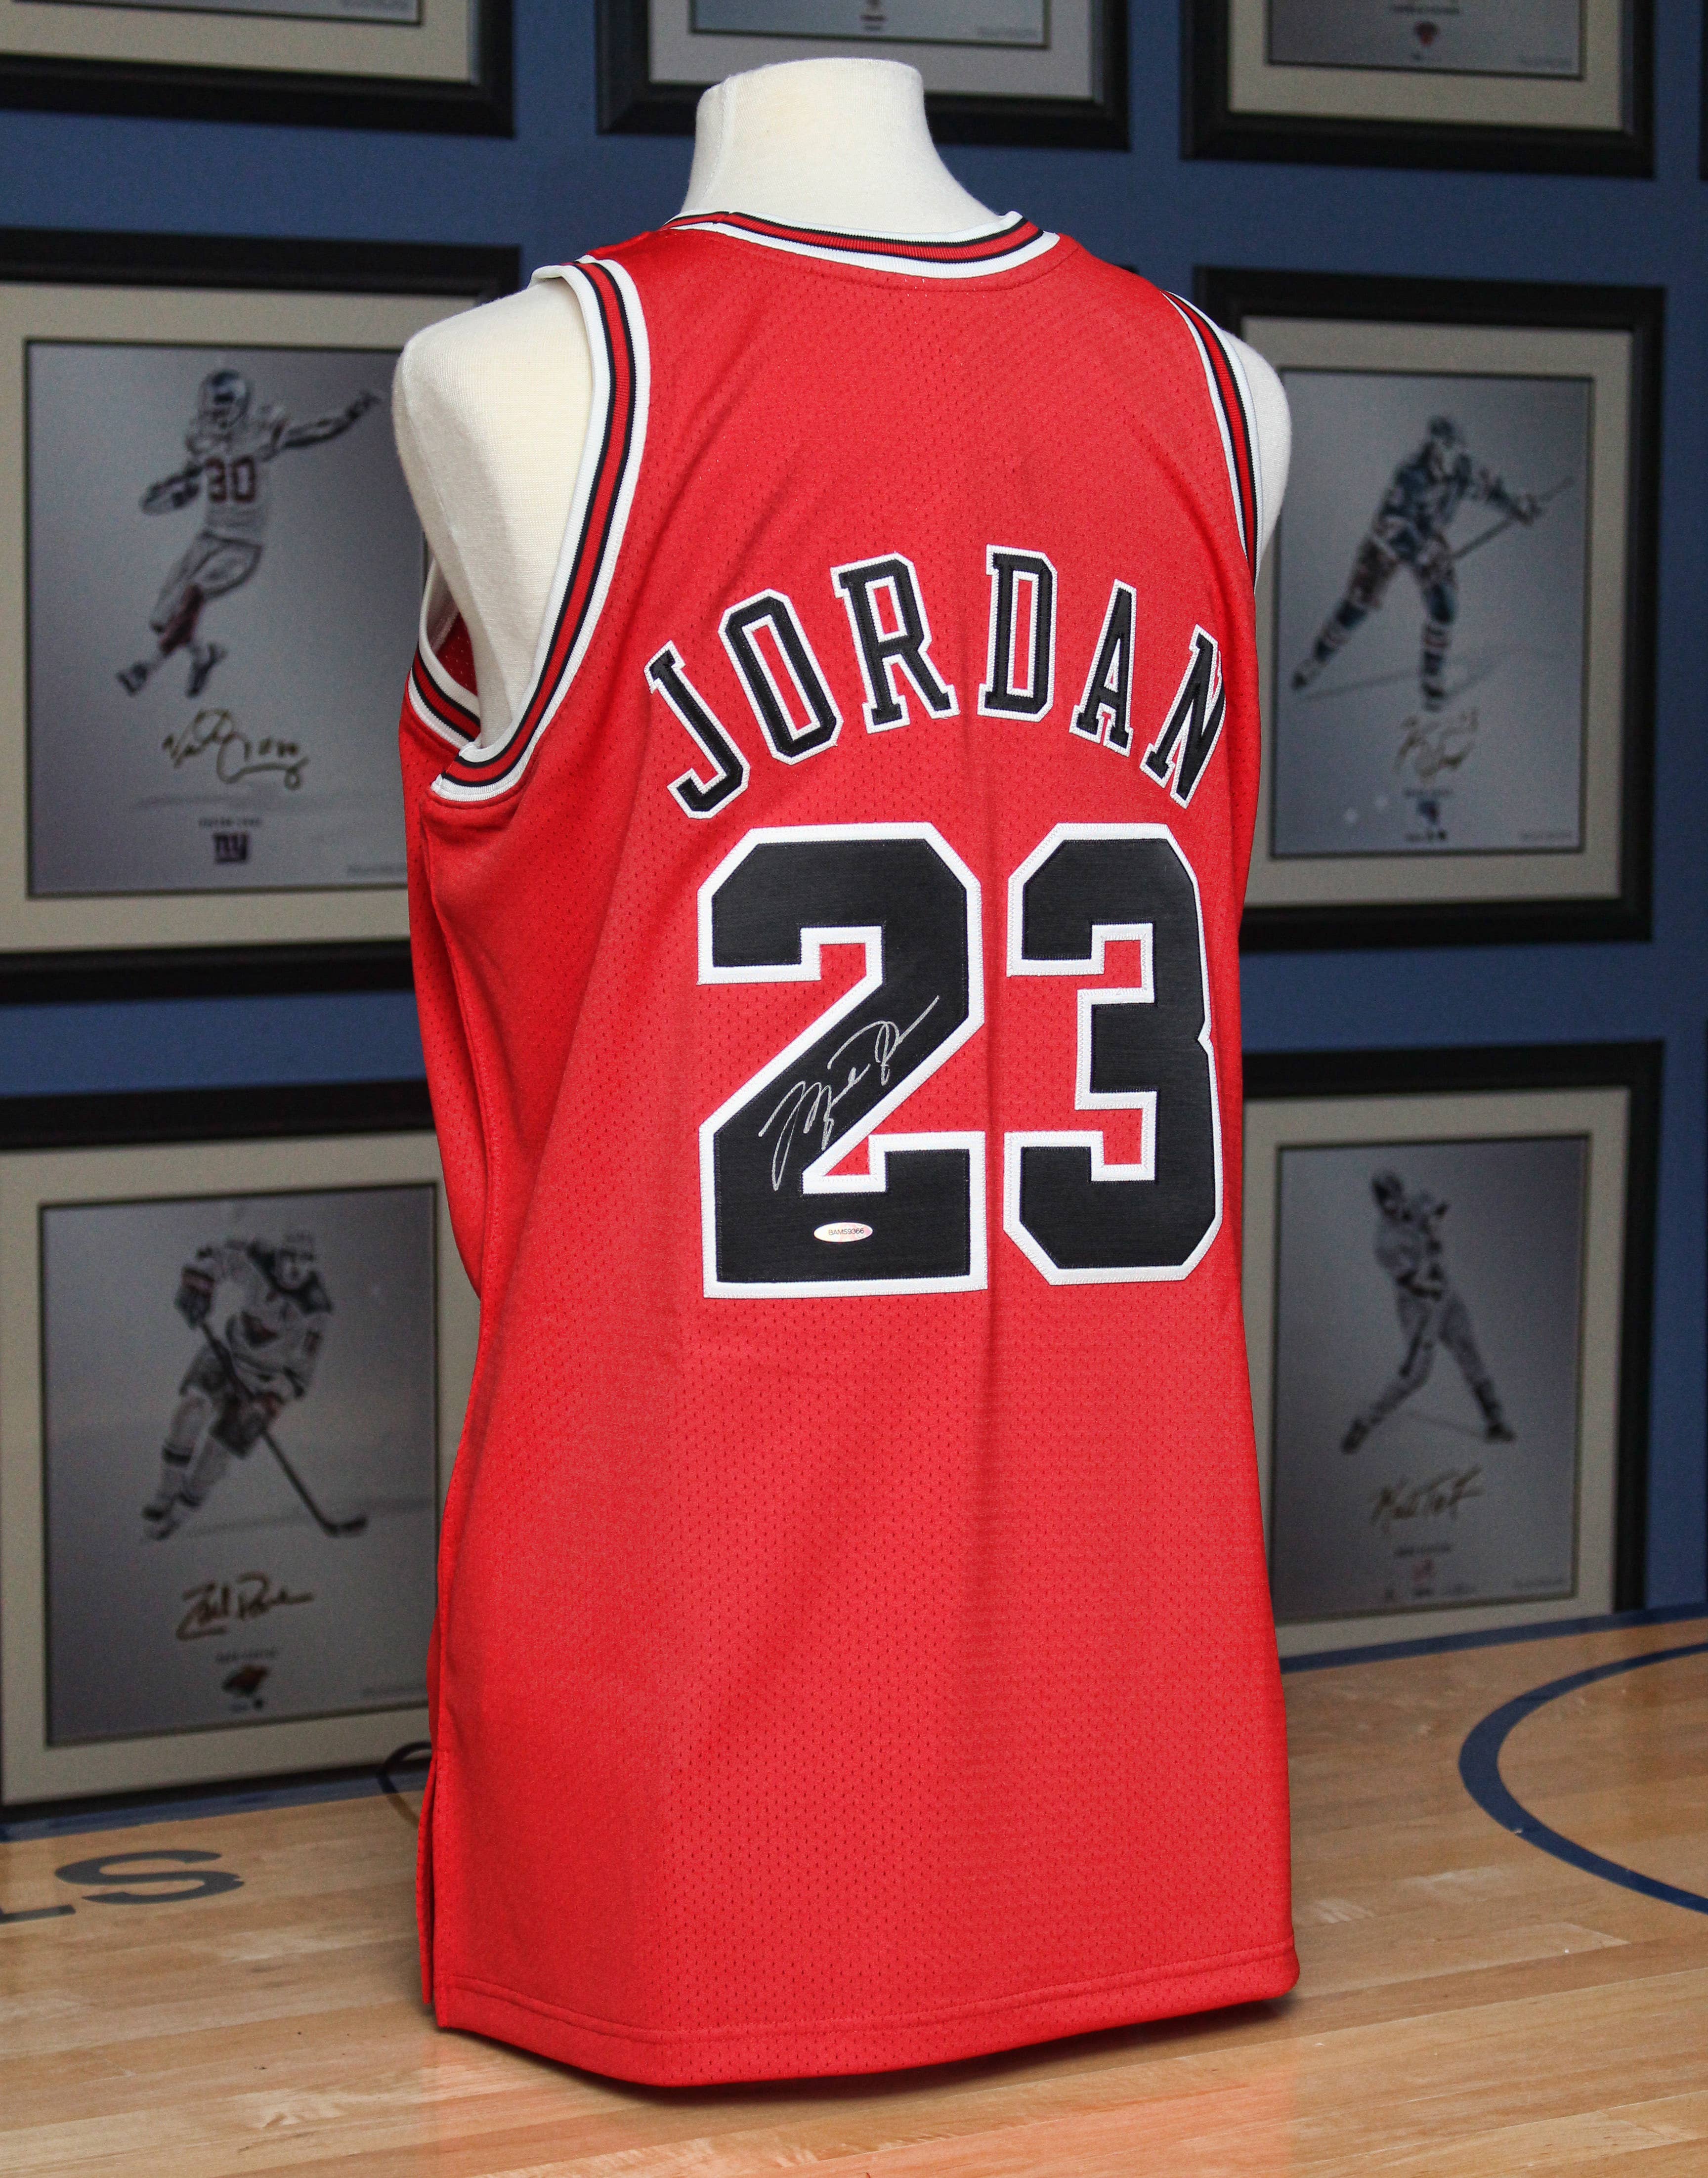 Michael Jordan's Chicago Bulls signing-day jersey up for auction